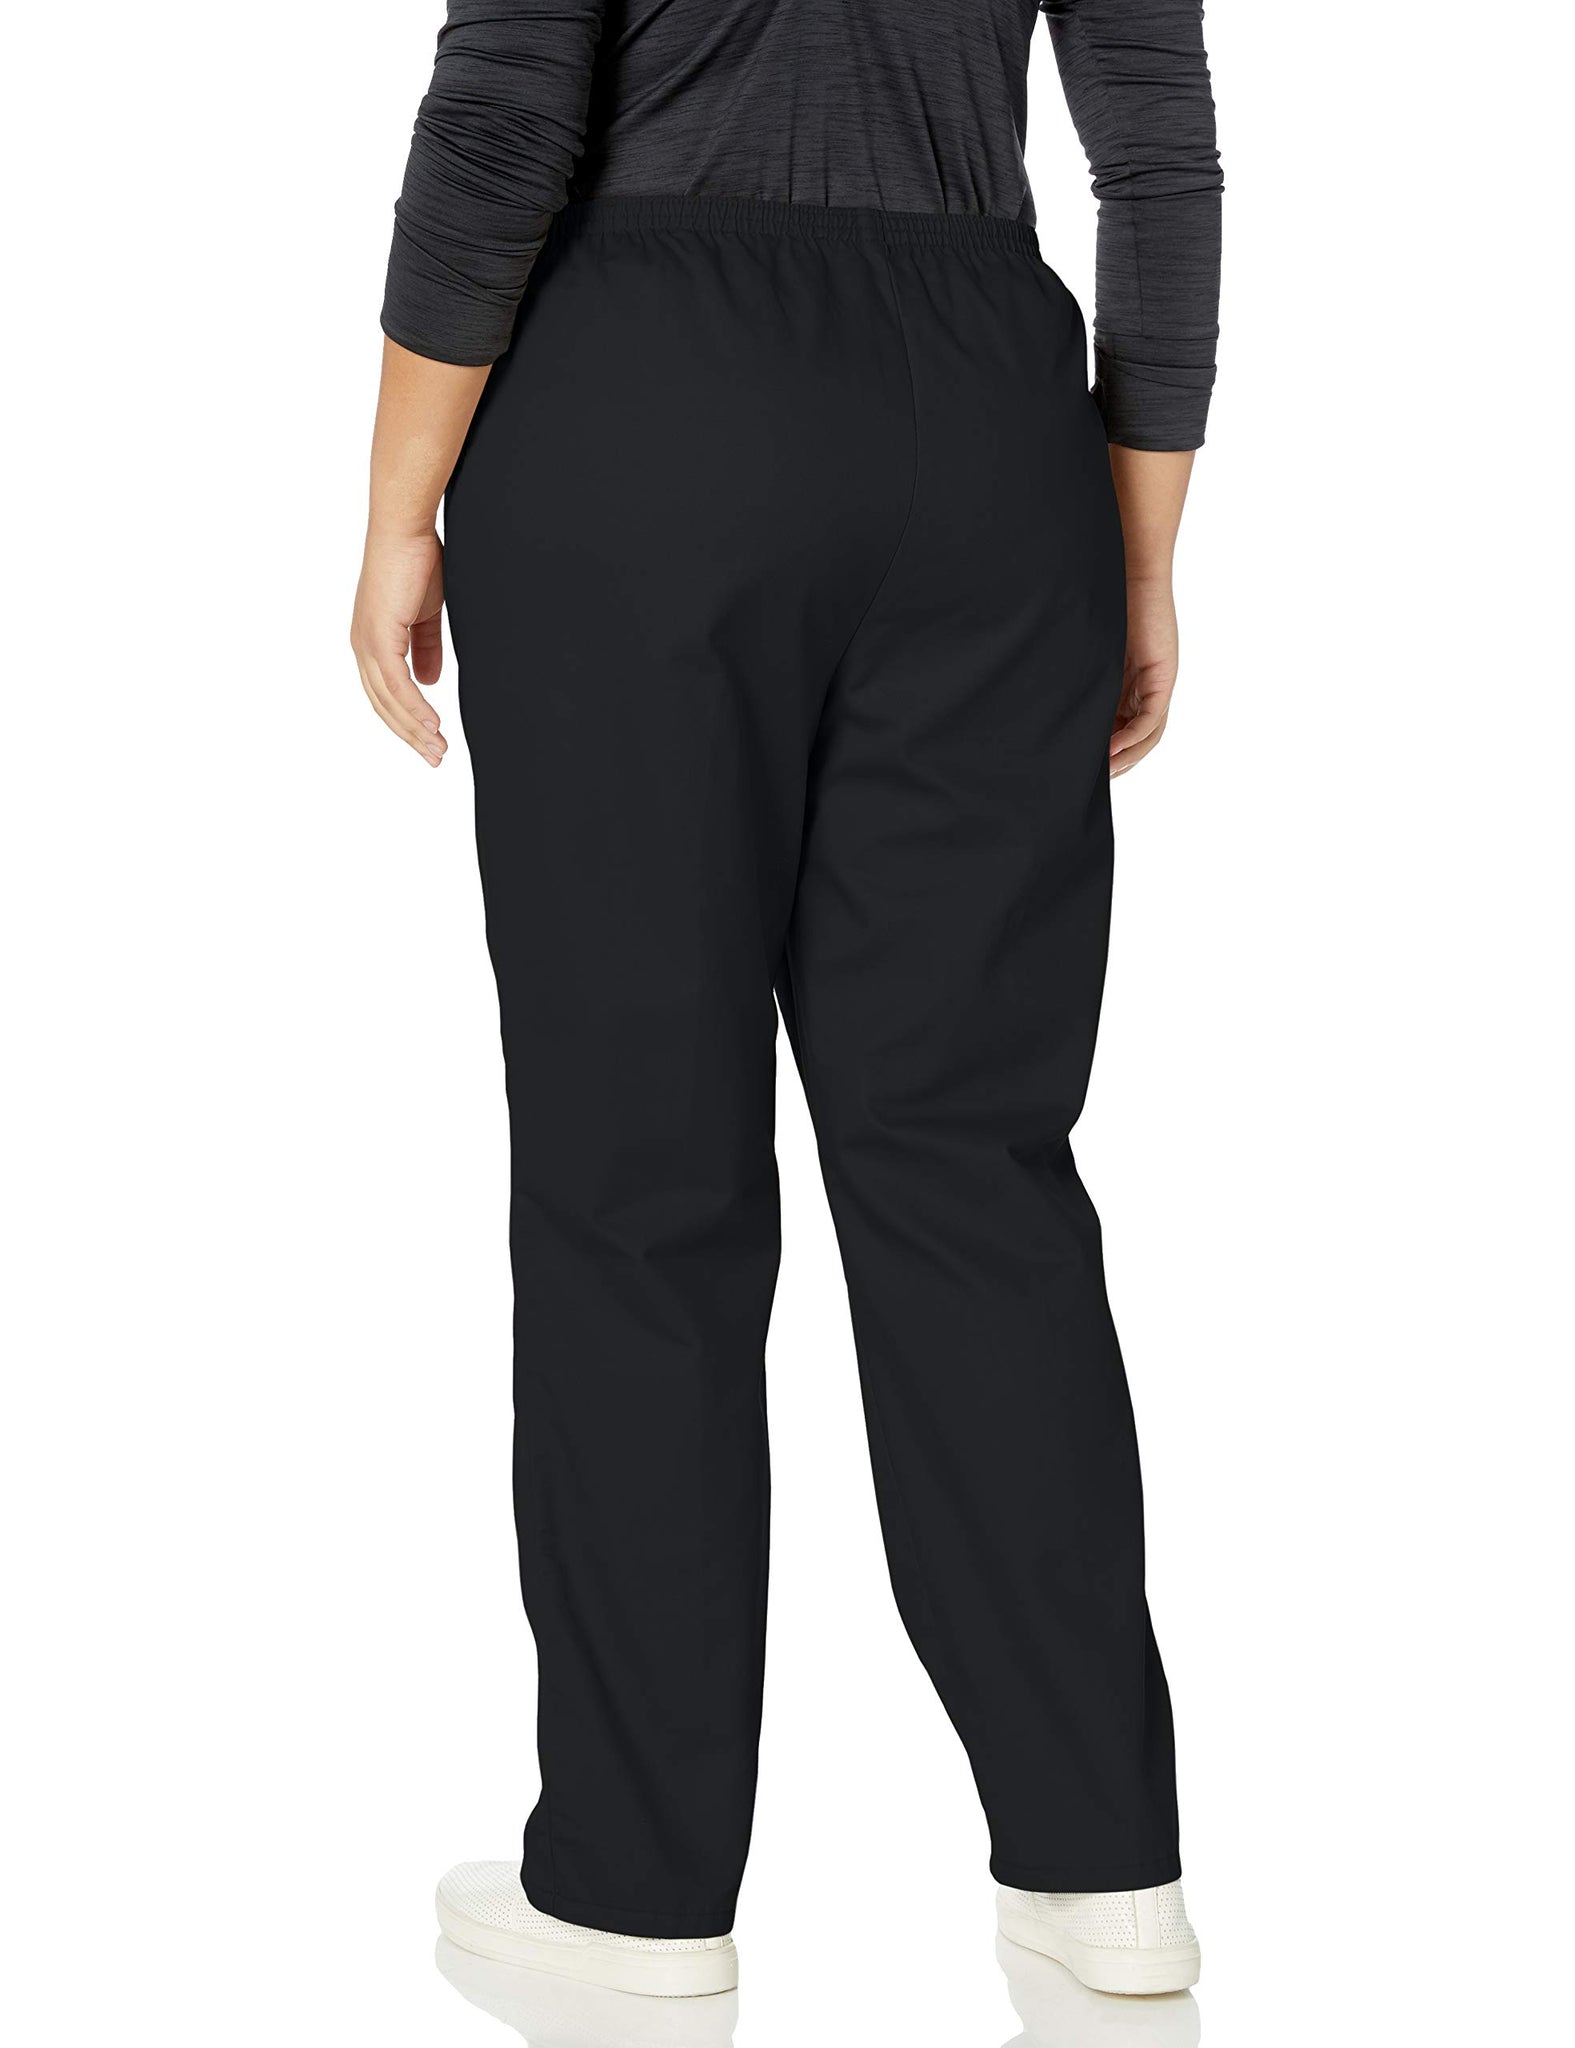 Chic Classic Collection Women's Cotton Pull-on Pant with Elastic